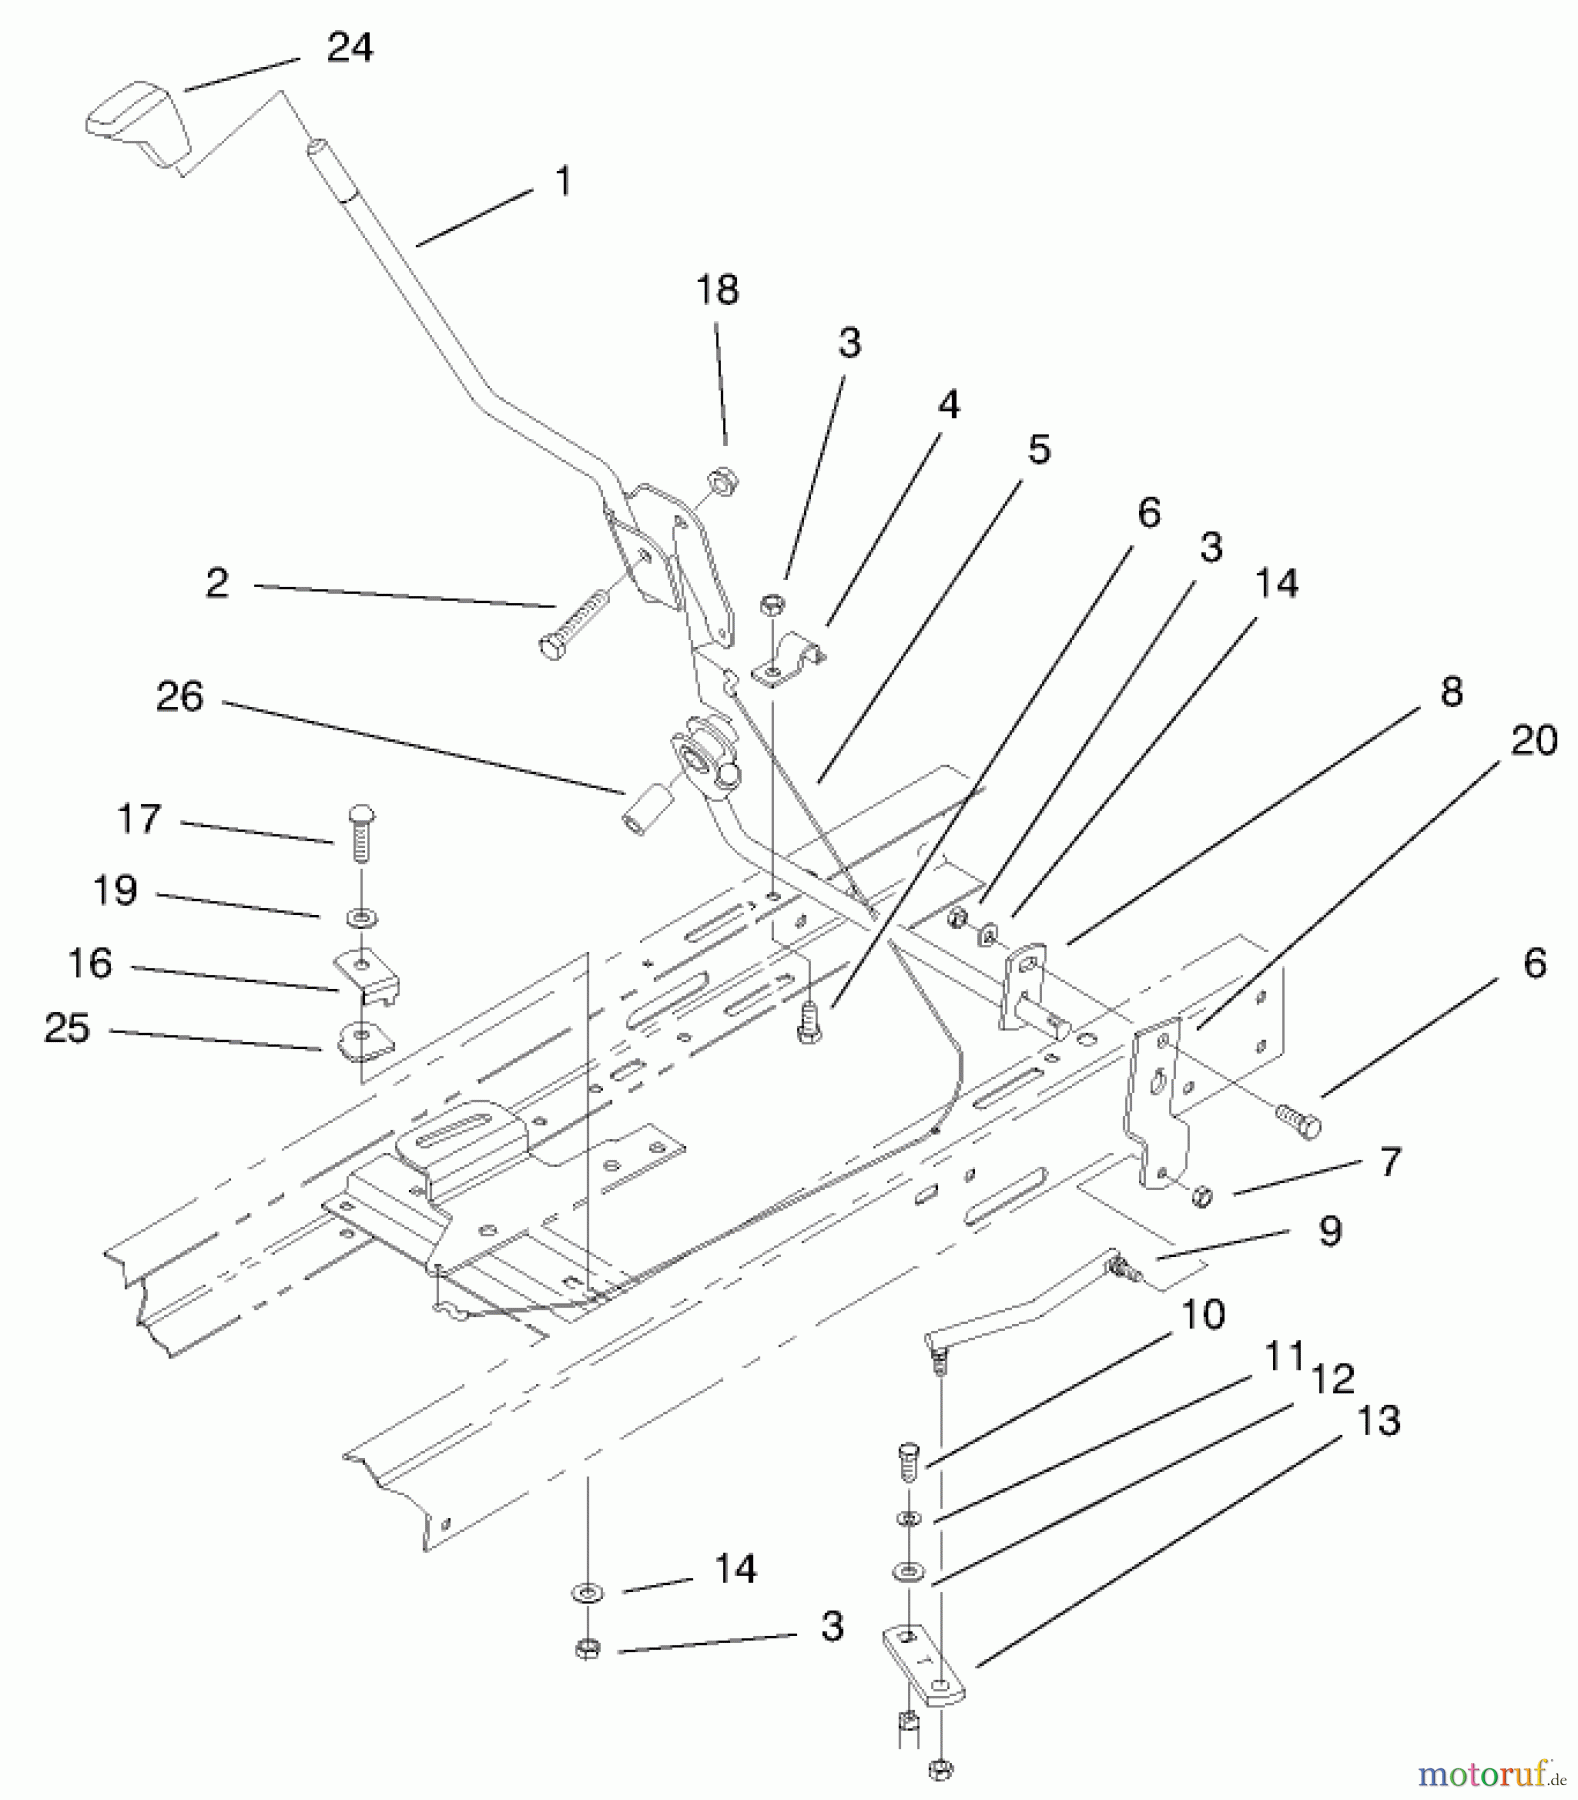  Toro Neu Mowers, Lawn & Garden Tractor Seite 1 71209 (13-32XLE) - Toro 13-32XLE Lawn Tractor, 1999 (9900001-9999999) SHIFTING COMPONENTS ASSEMBLY